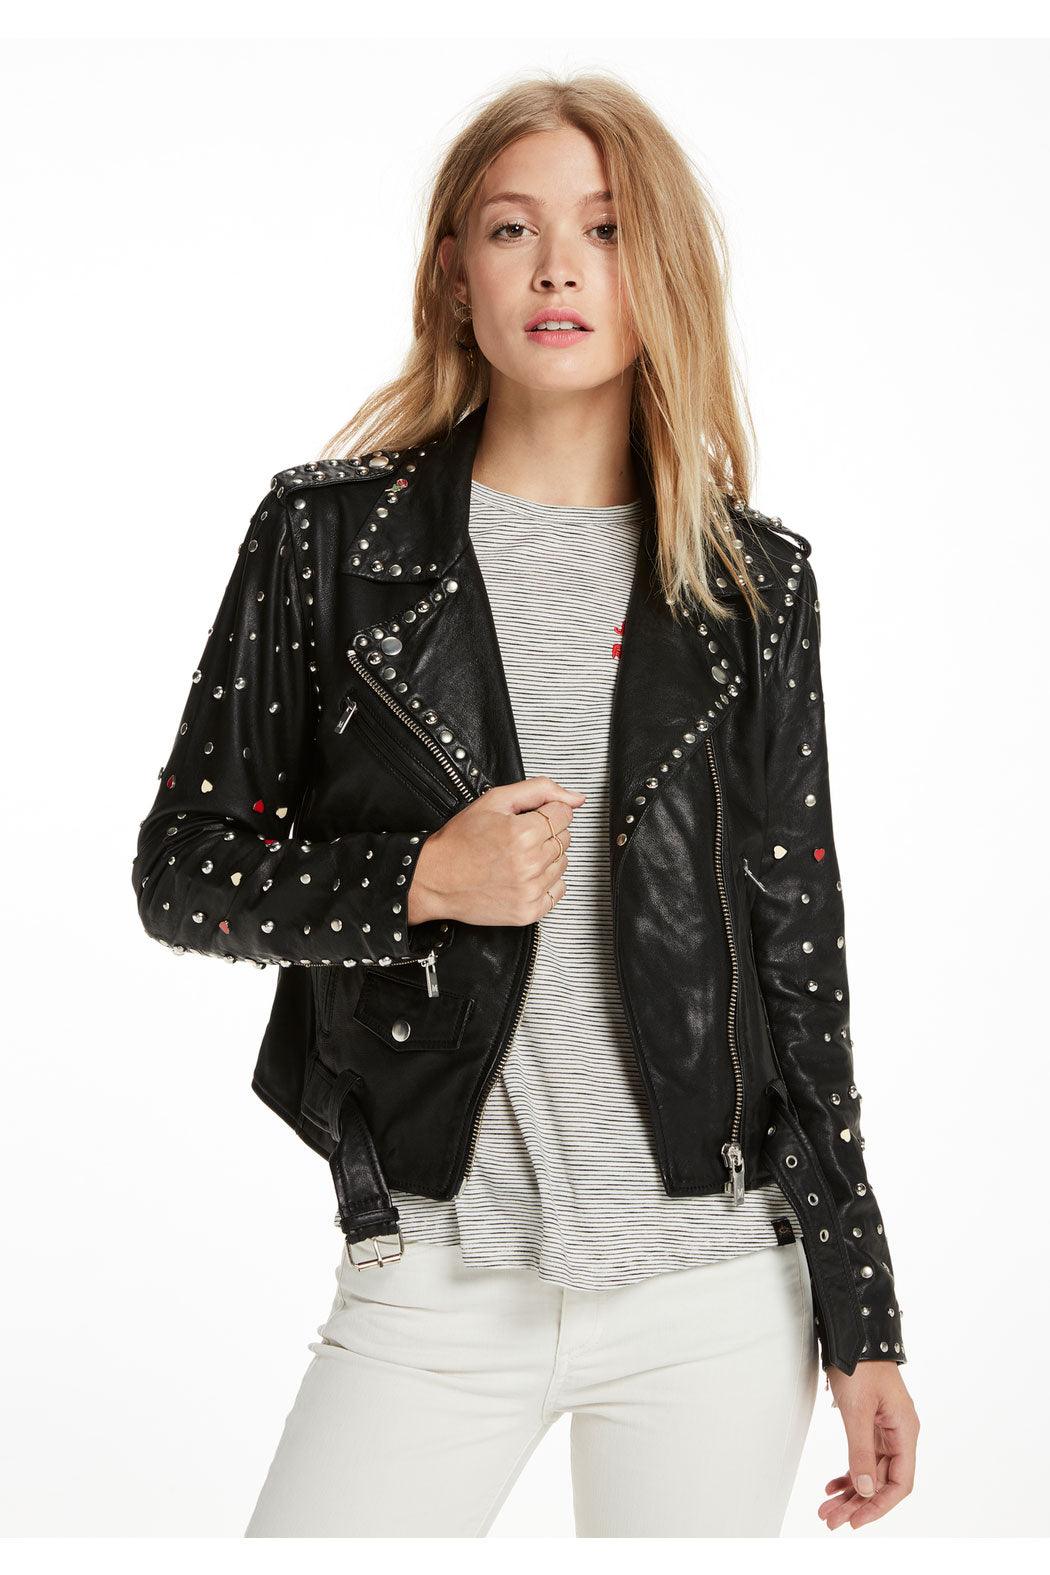 Black Women Spiked Studded Leather Motorcycle Jacket - Leather Loom